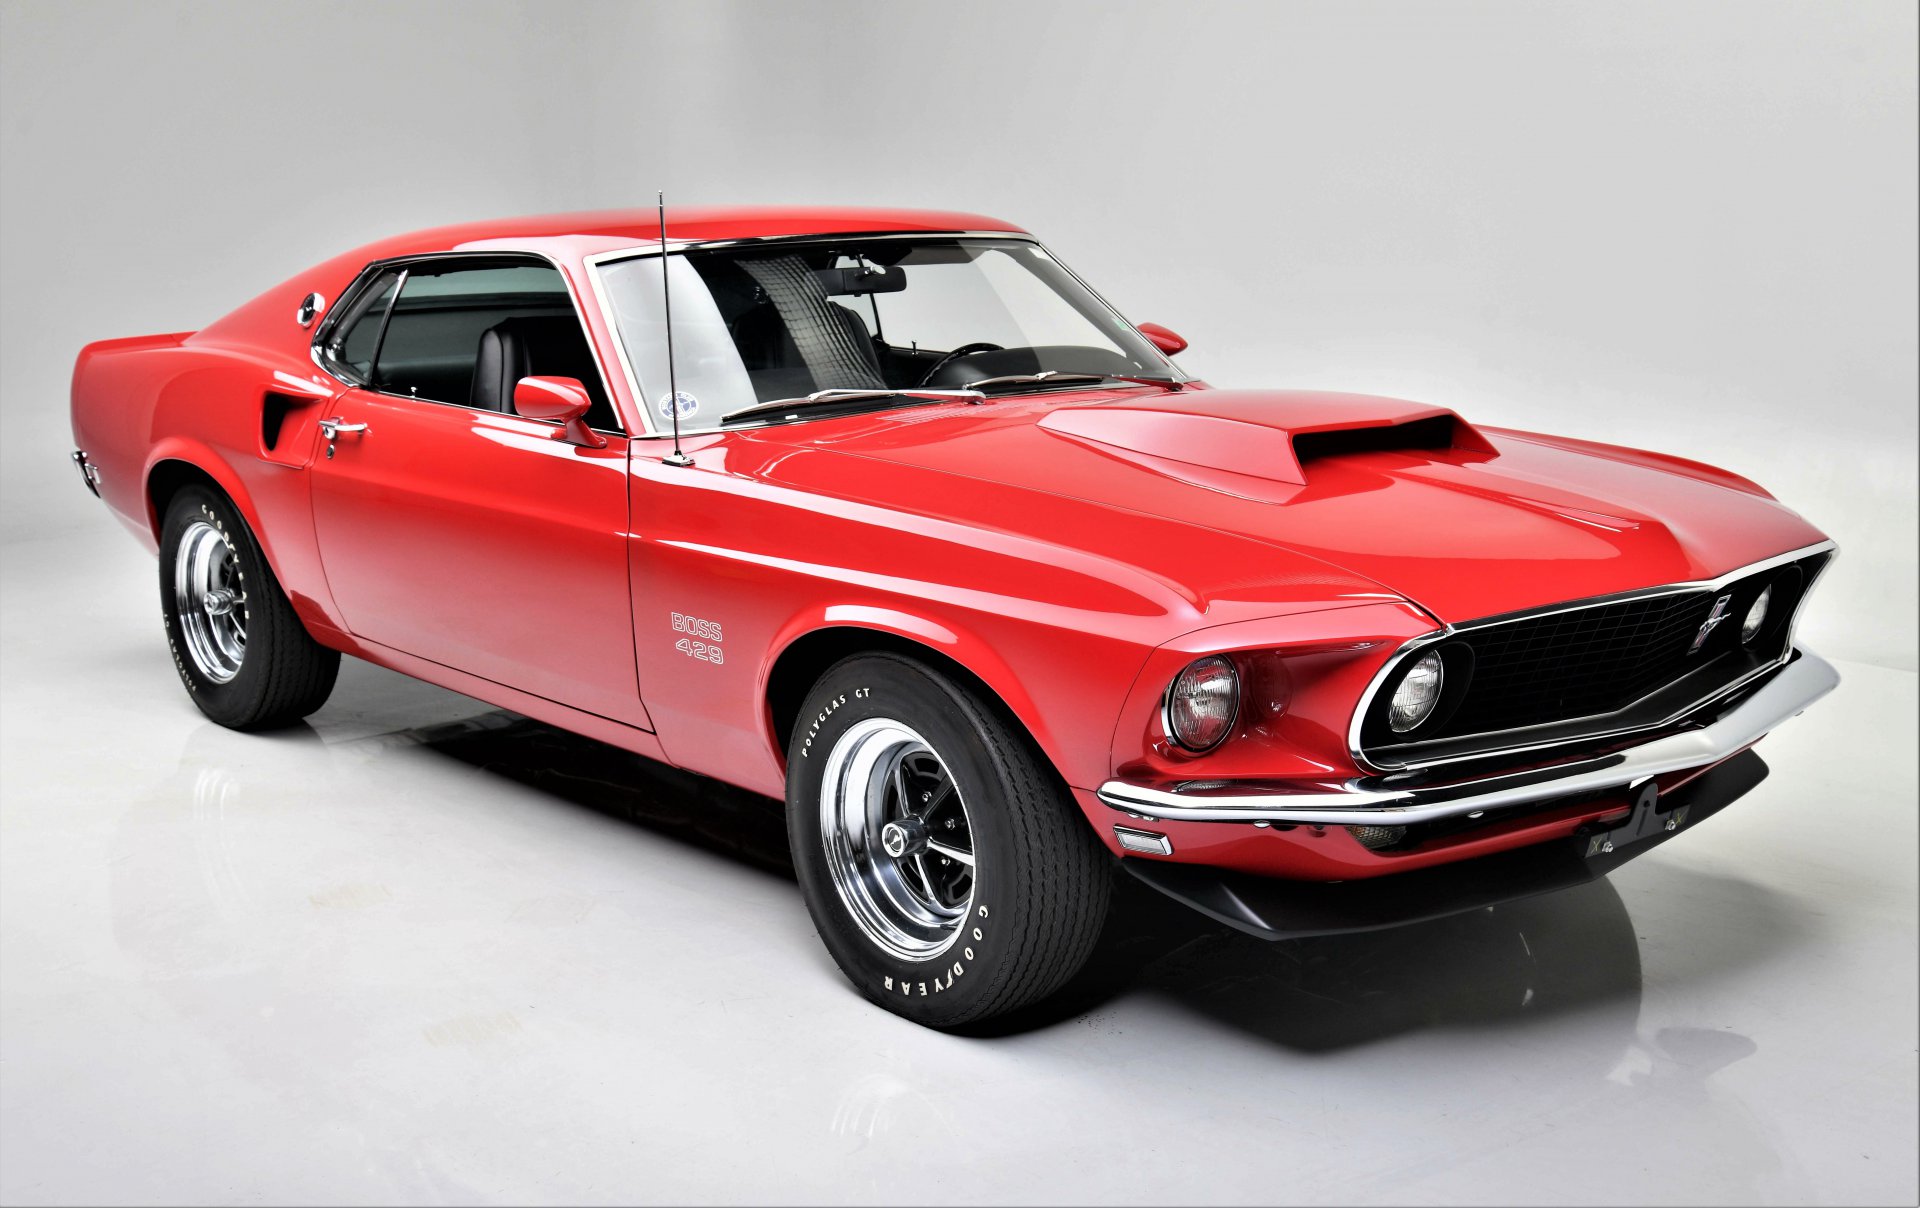 Big-block muscle cars featured at Barrett-Jackson Scottsdale auction